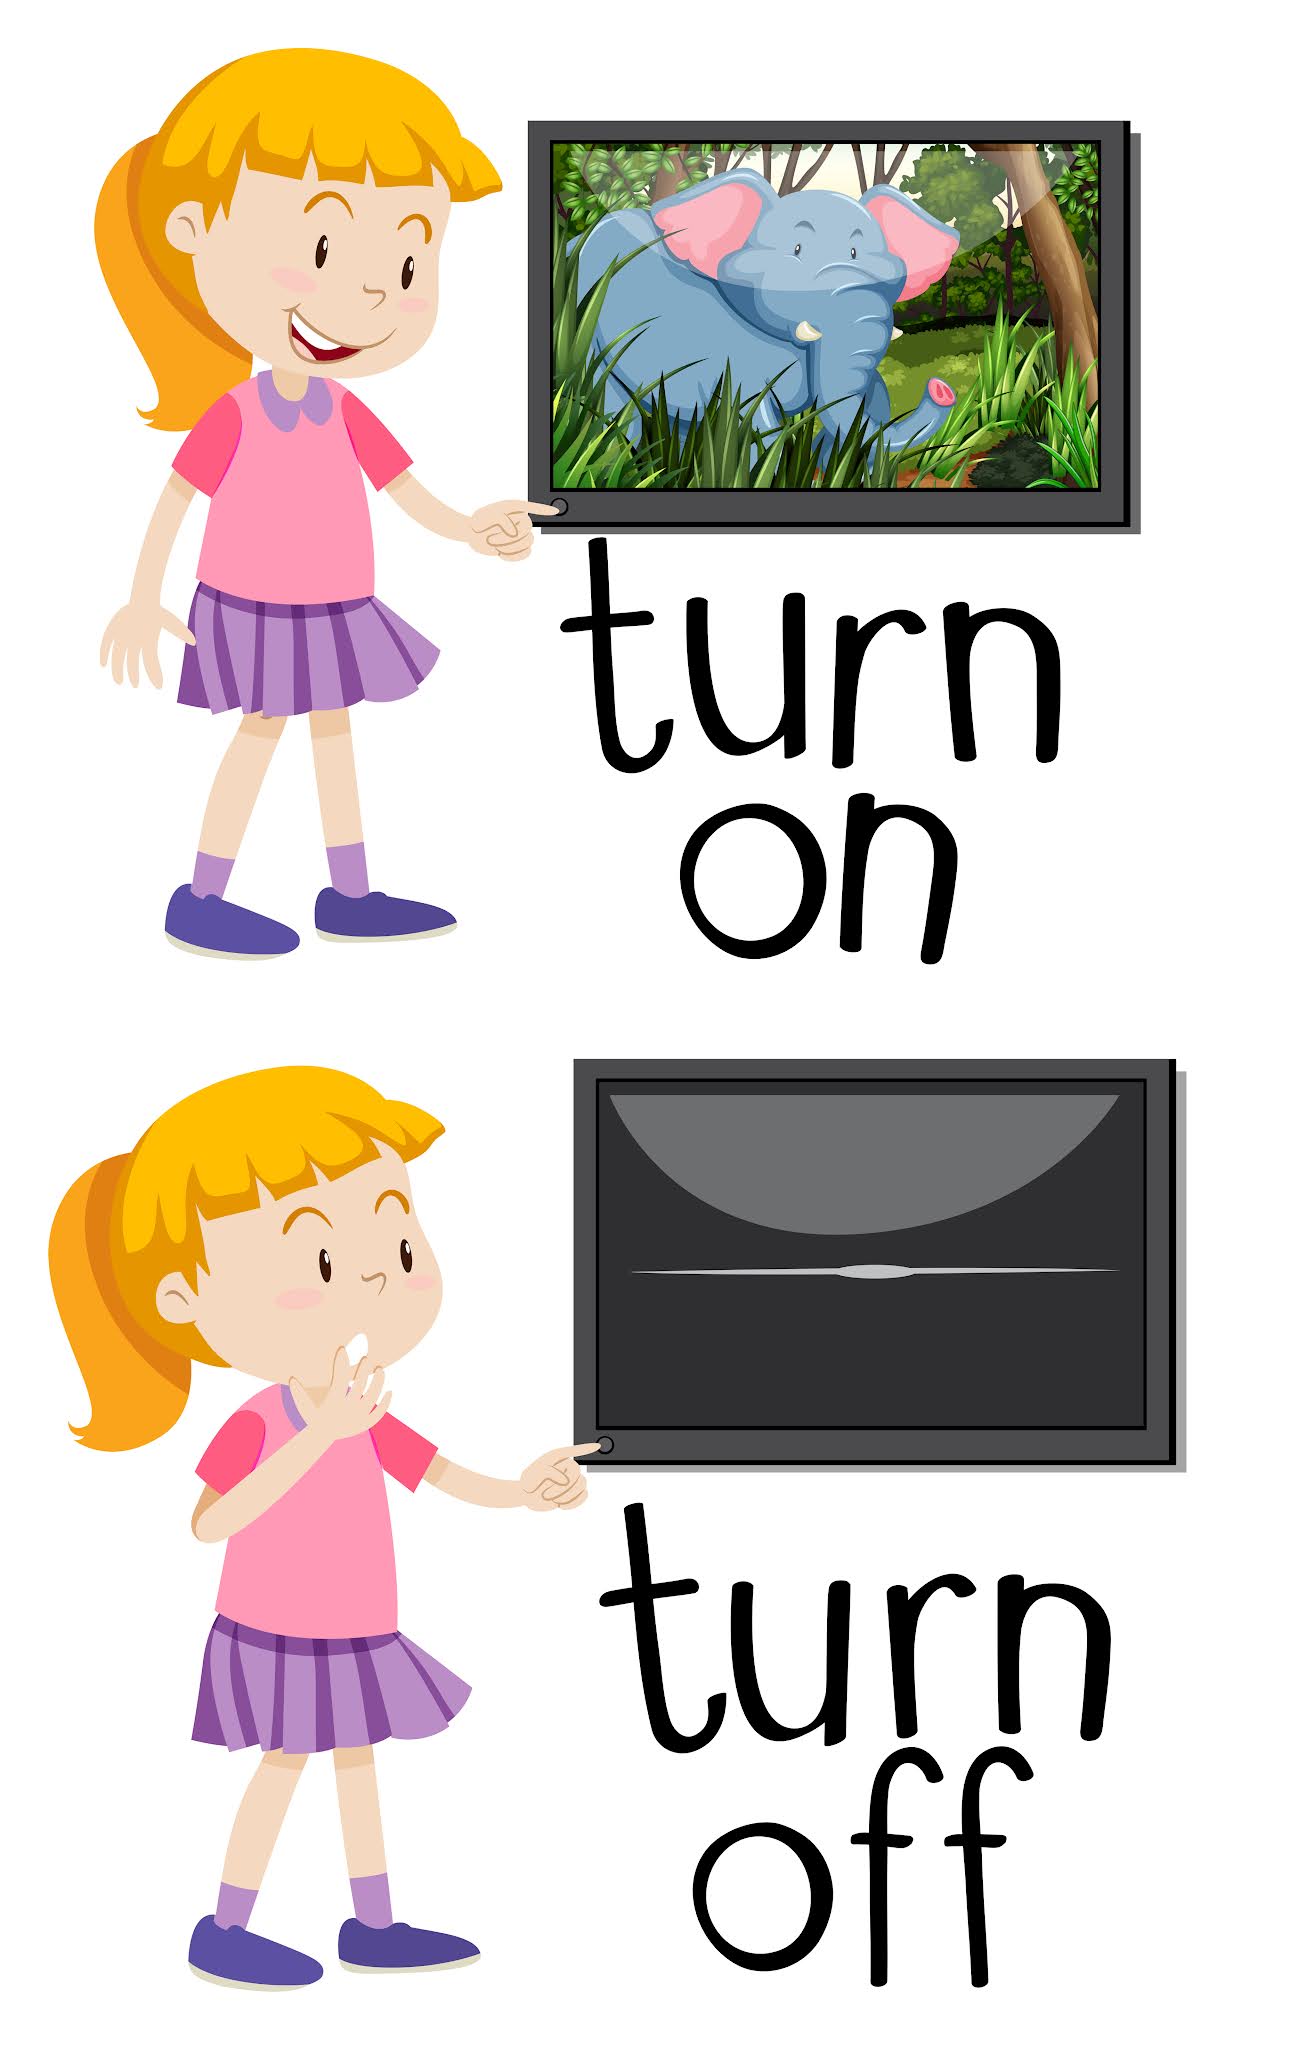 Turn on off. Turn on turn off. Turn off картинка. Turn картинка для детей. Turn off means